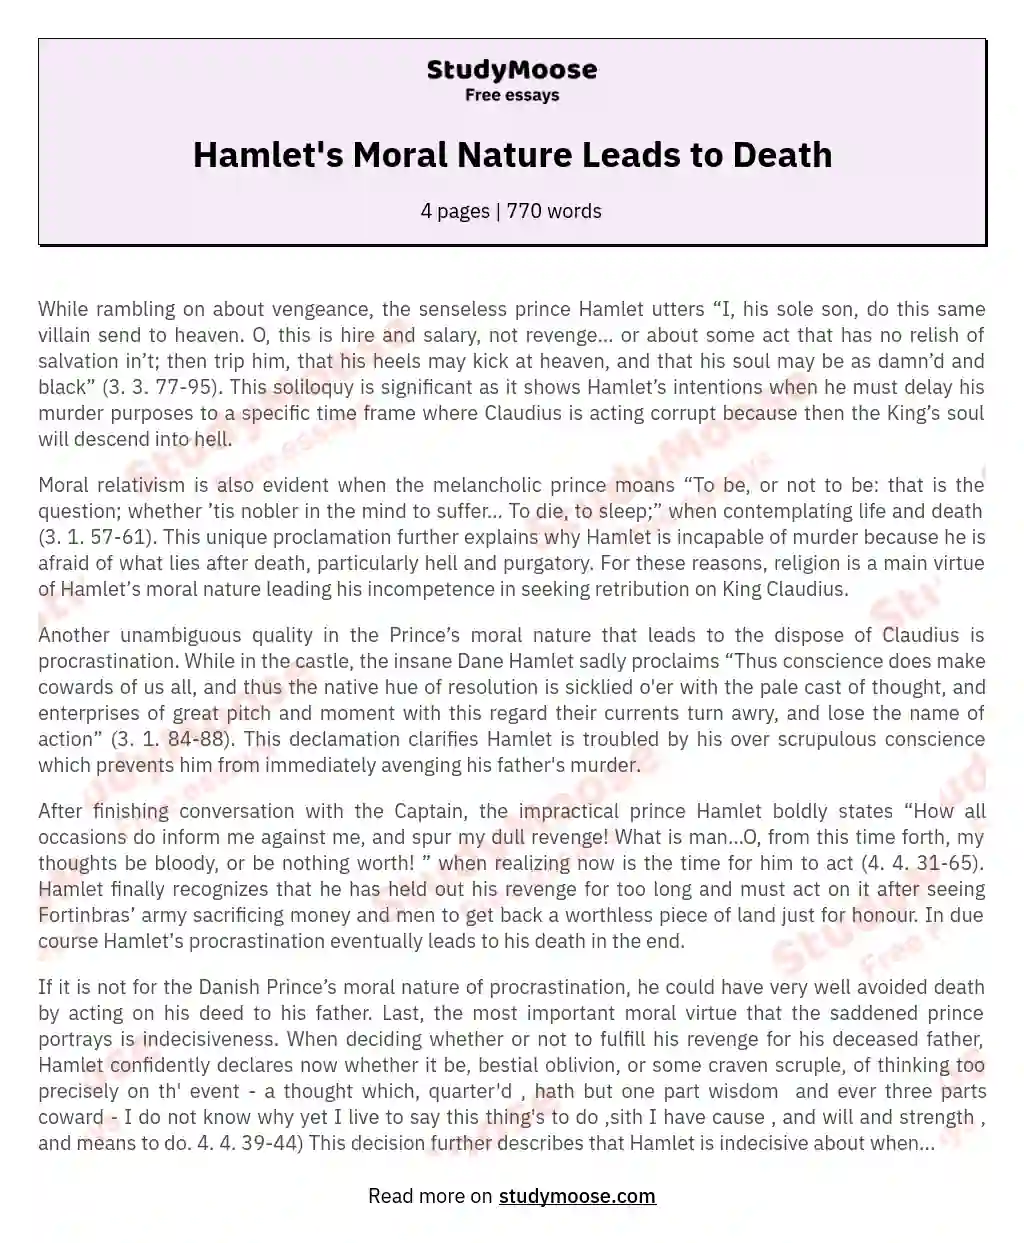 Hamlet's Moral Nature Leads to Death essay